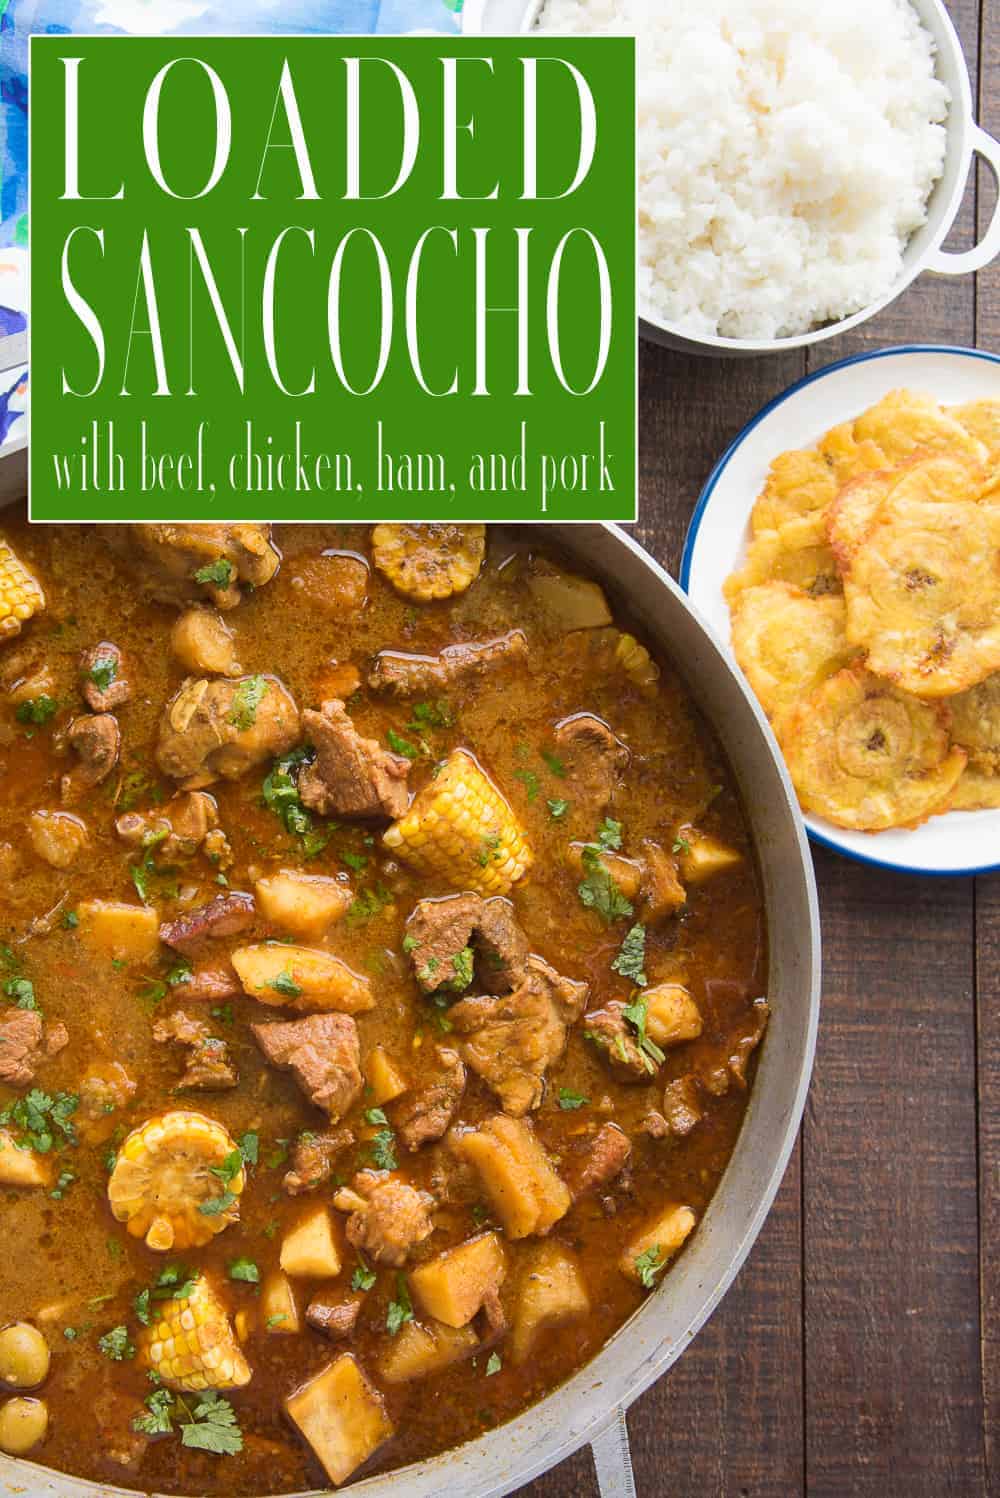 Sancocho is a true comfort stew beloved in many Latin American countries. This version is made with chicken, beef, ham, and pork and a variety of root vegetables. It's the sum of all the amazing recipes from around Latin America. #sancocho #stew #soup #sancochopuertorriqueño #Domincansancocho #PuertoRicanSancocho #meatandvegetablestew #soup #heartystew #dinner #entree #LatinAmerican #Hispanic #PuertoRicanRecipe #ColombianSancocho #onepotmeal #freezerfriendly #souprecipe #sancochorecipe via @ediblesense